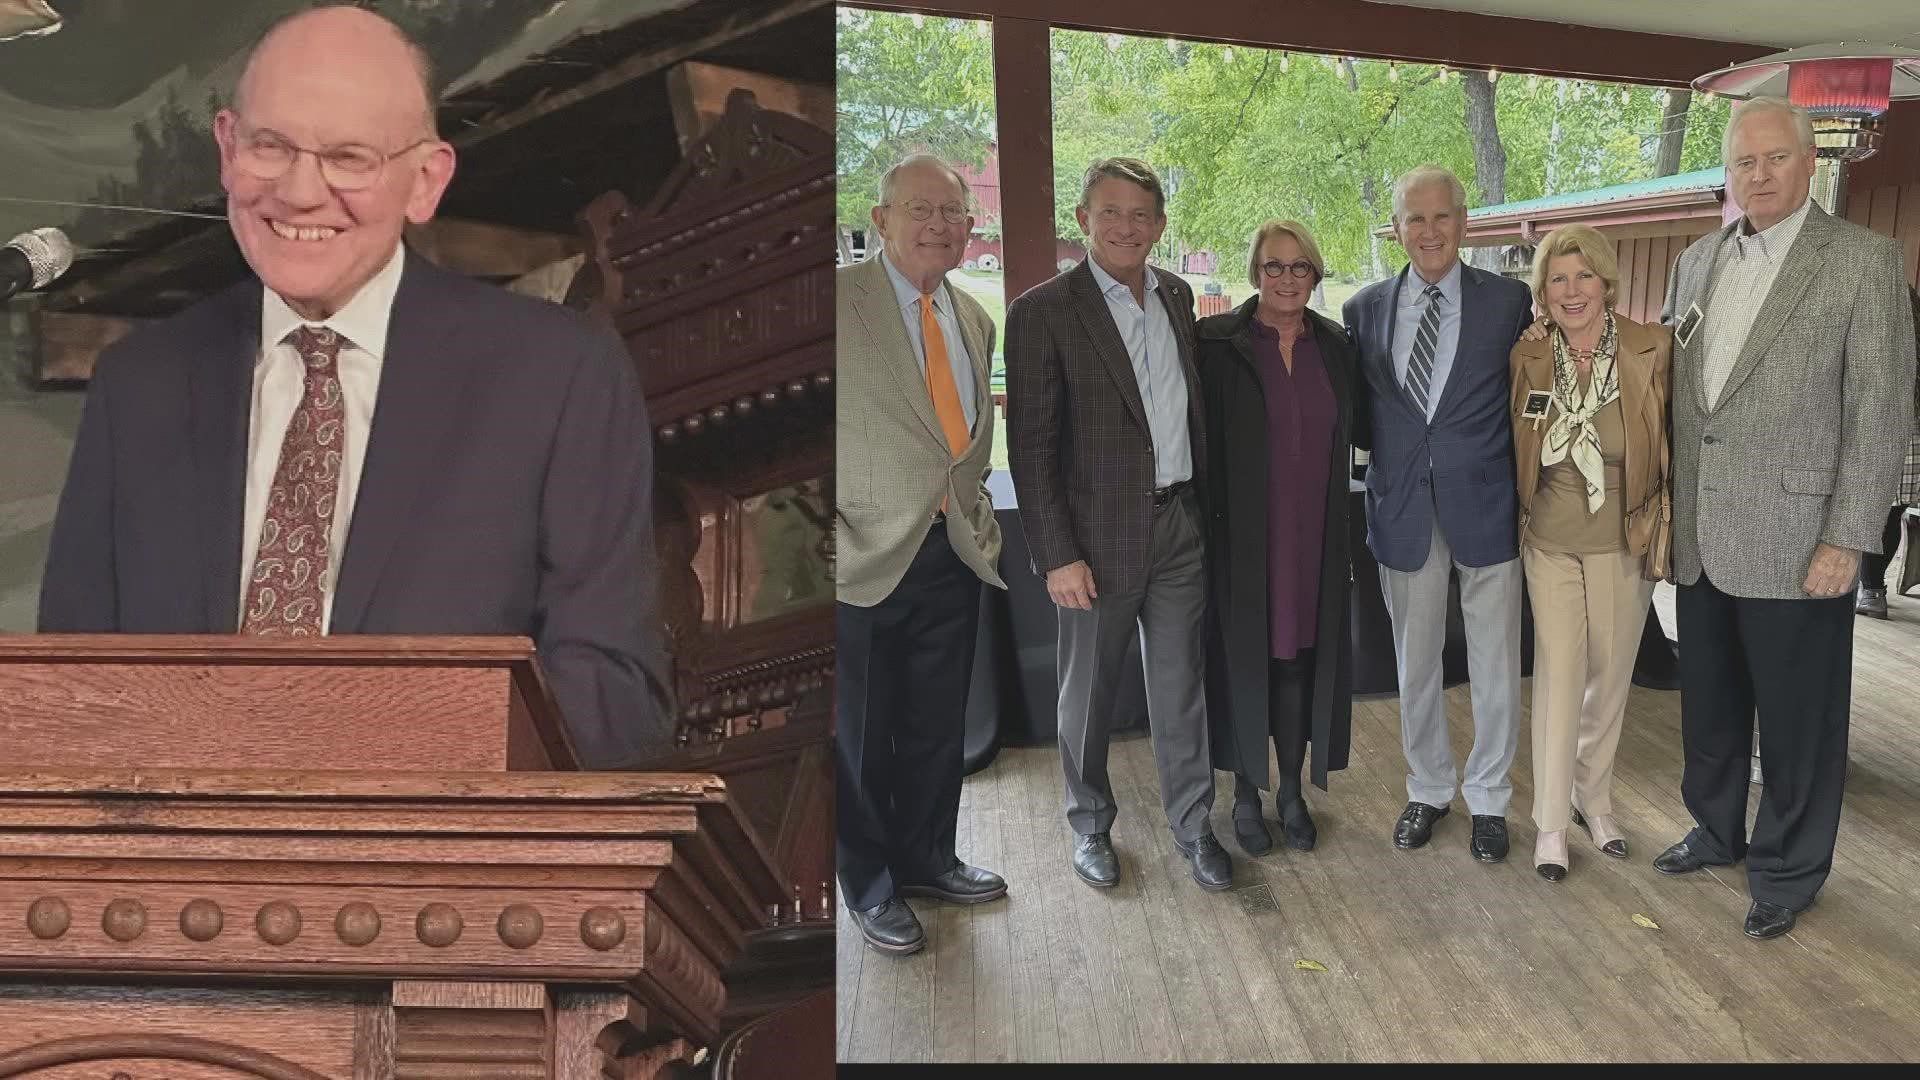 Dr. Joe Johnson and Jim Hart were celebrated at the museum's "Heroes of Southern Appalachia" awards.